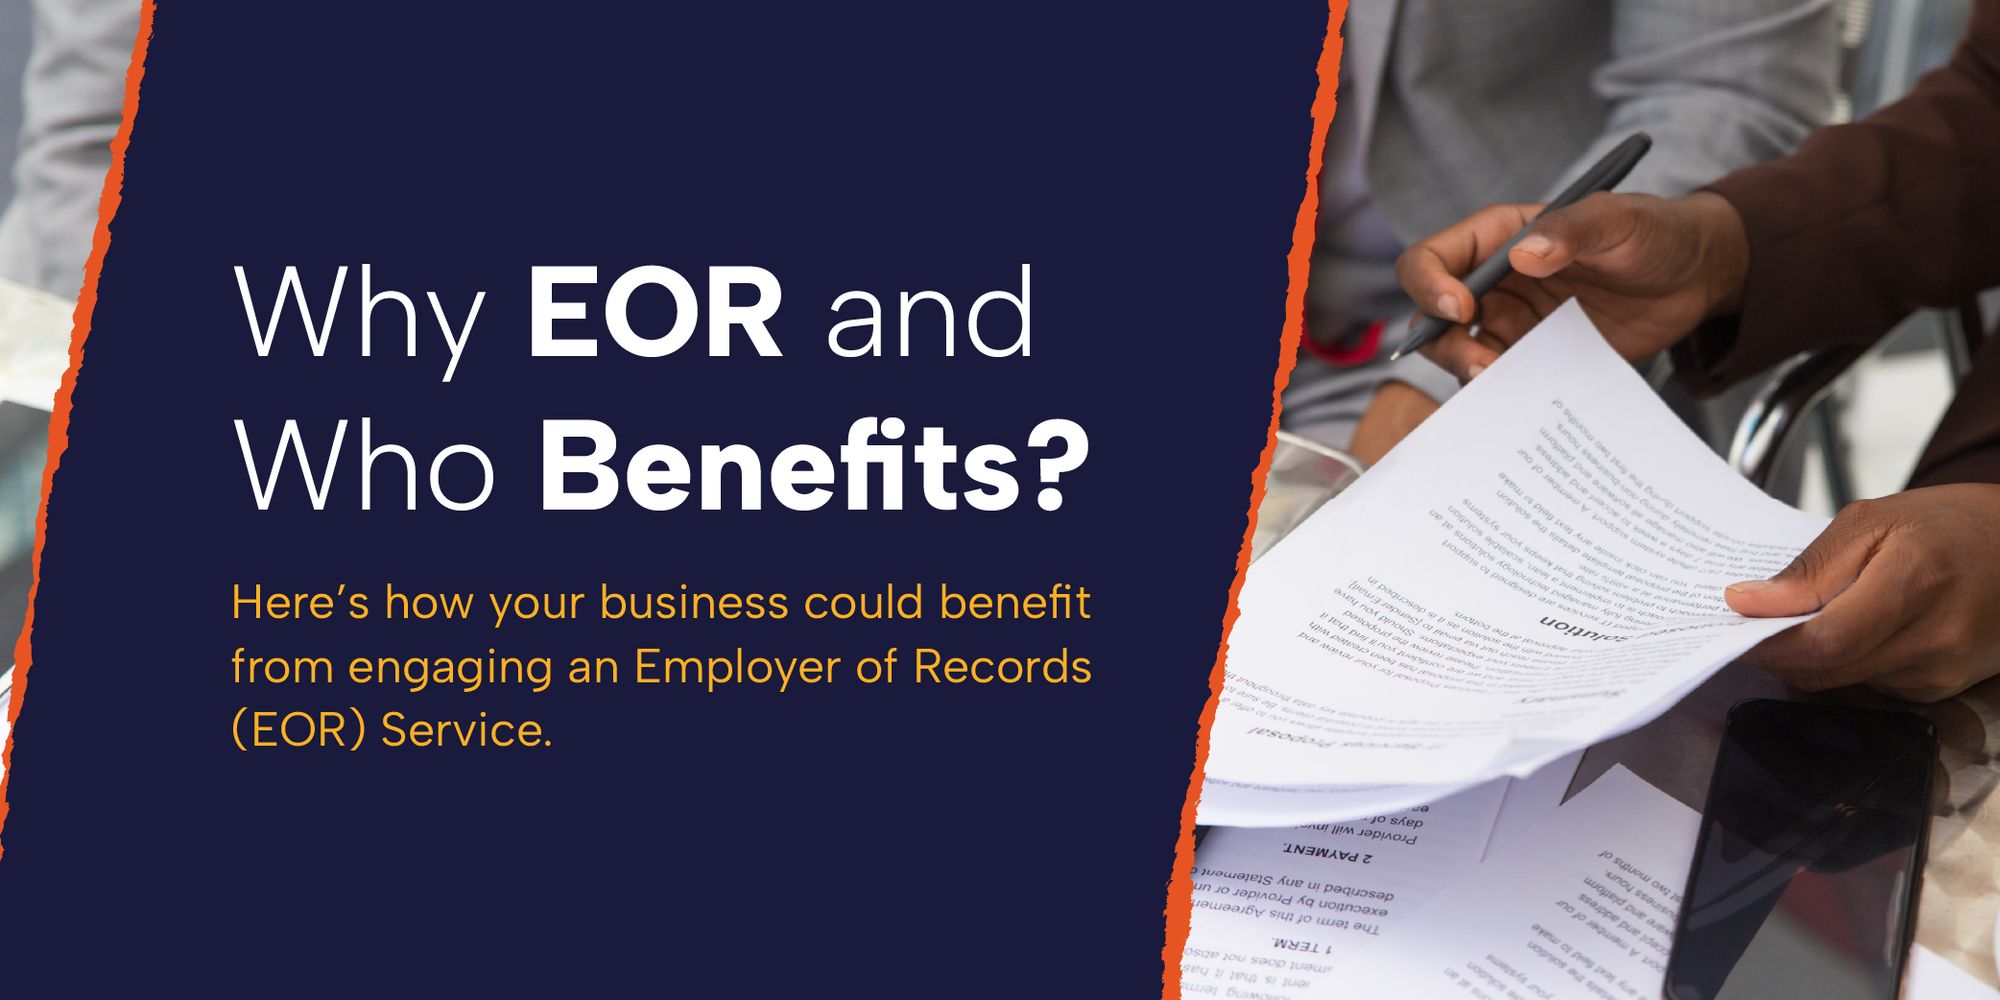 Why You Should Consider Engaging an EOR Service